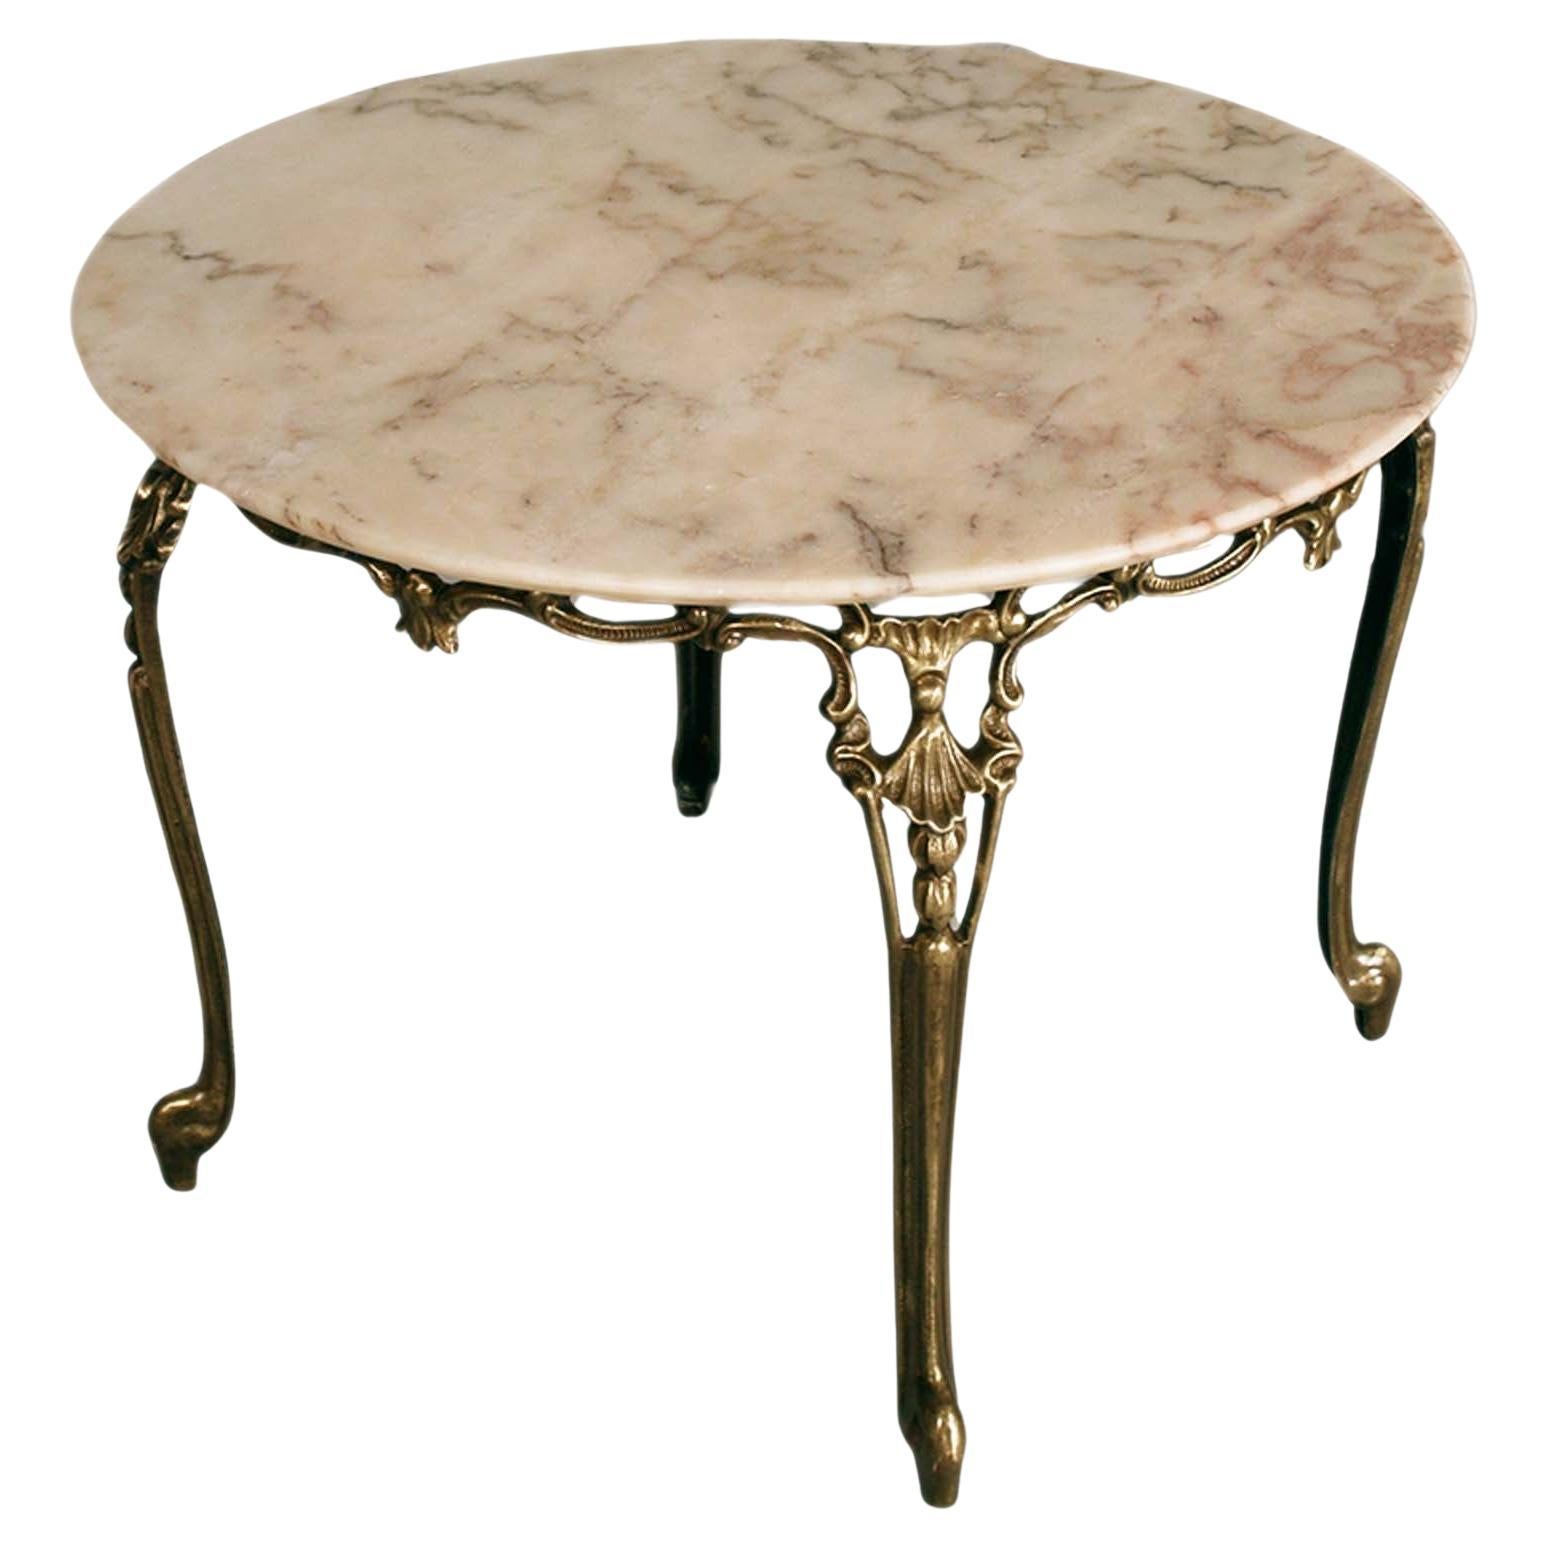 Fine antique French Early Louis XV Belle Epoque Cocktail Bronze Table , Central Coffee Table, with  Marble Top Rose Portugal. 
The finely carved bronze stand features characteristical refined curves and floral and arabesque inspired designs of the